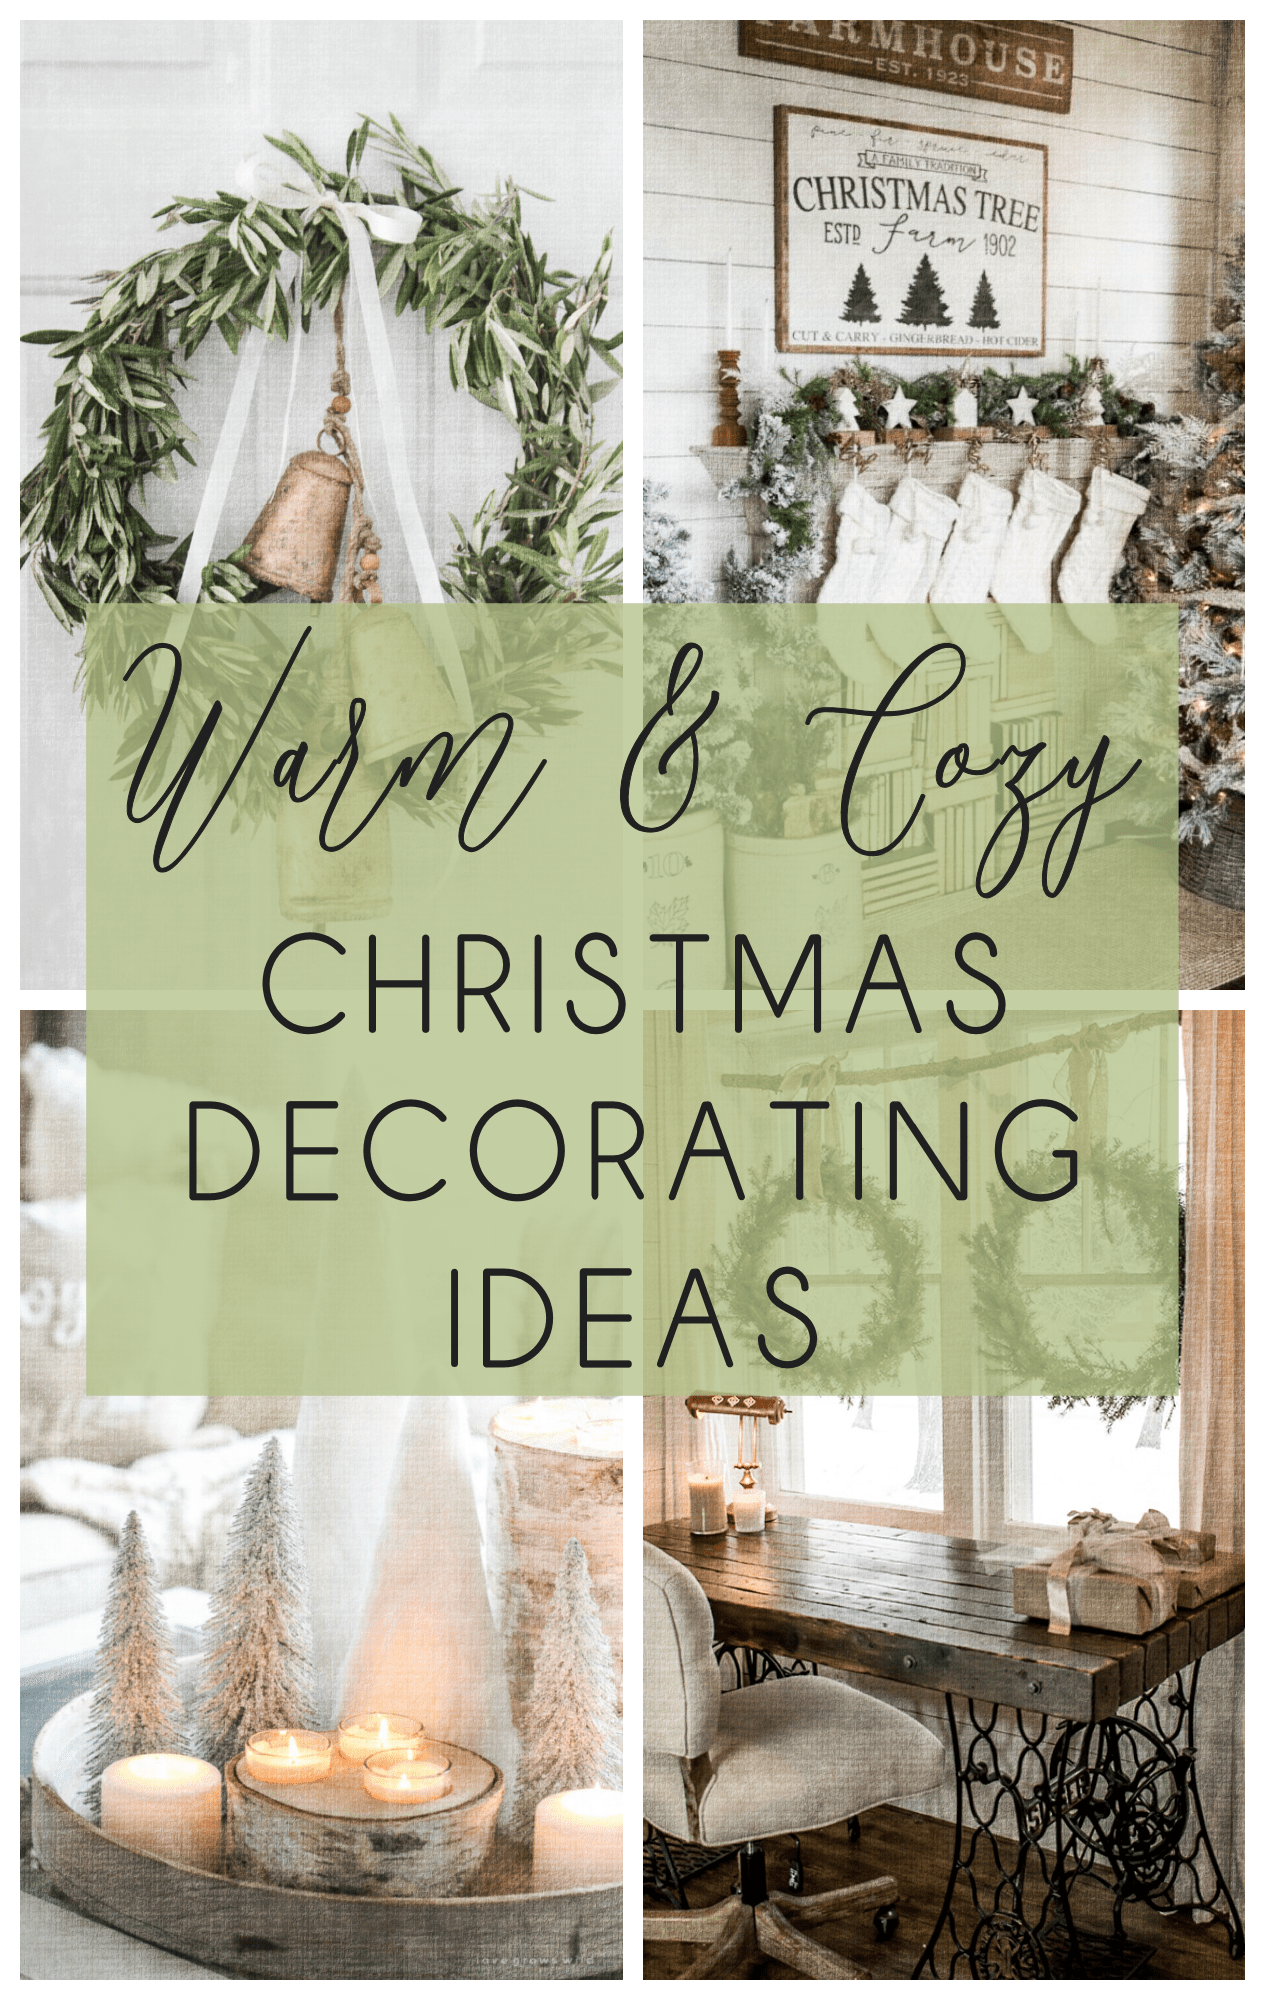 Warm and Cozy Christmas Decorating Ideas